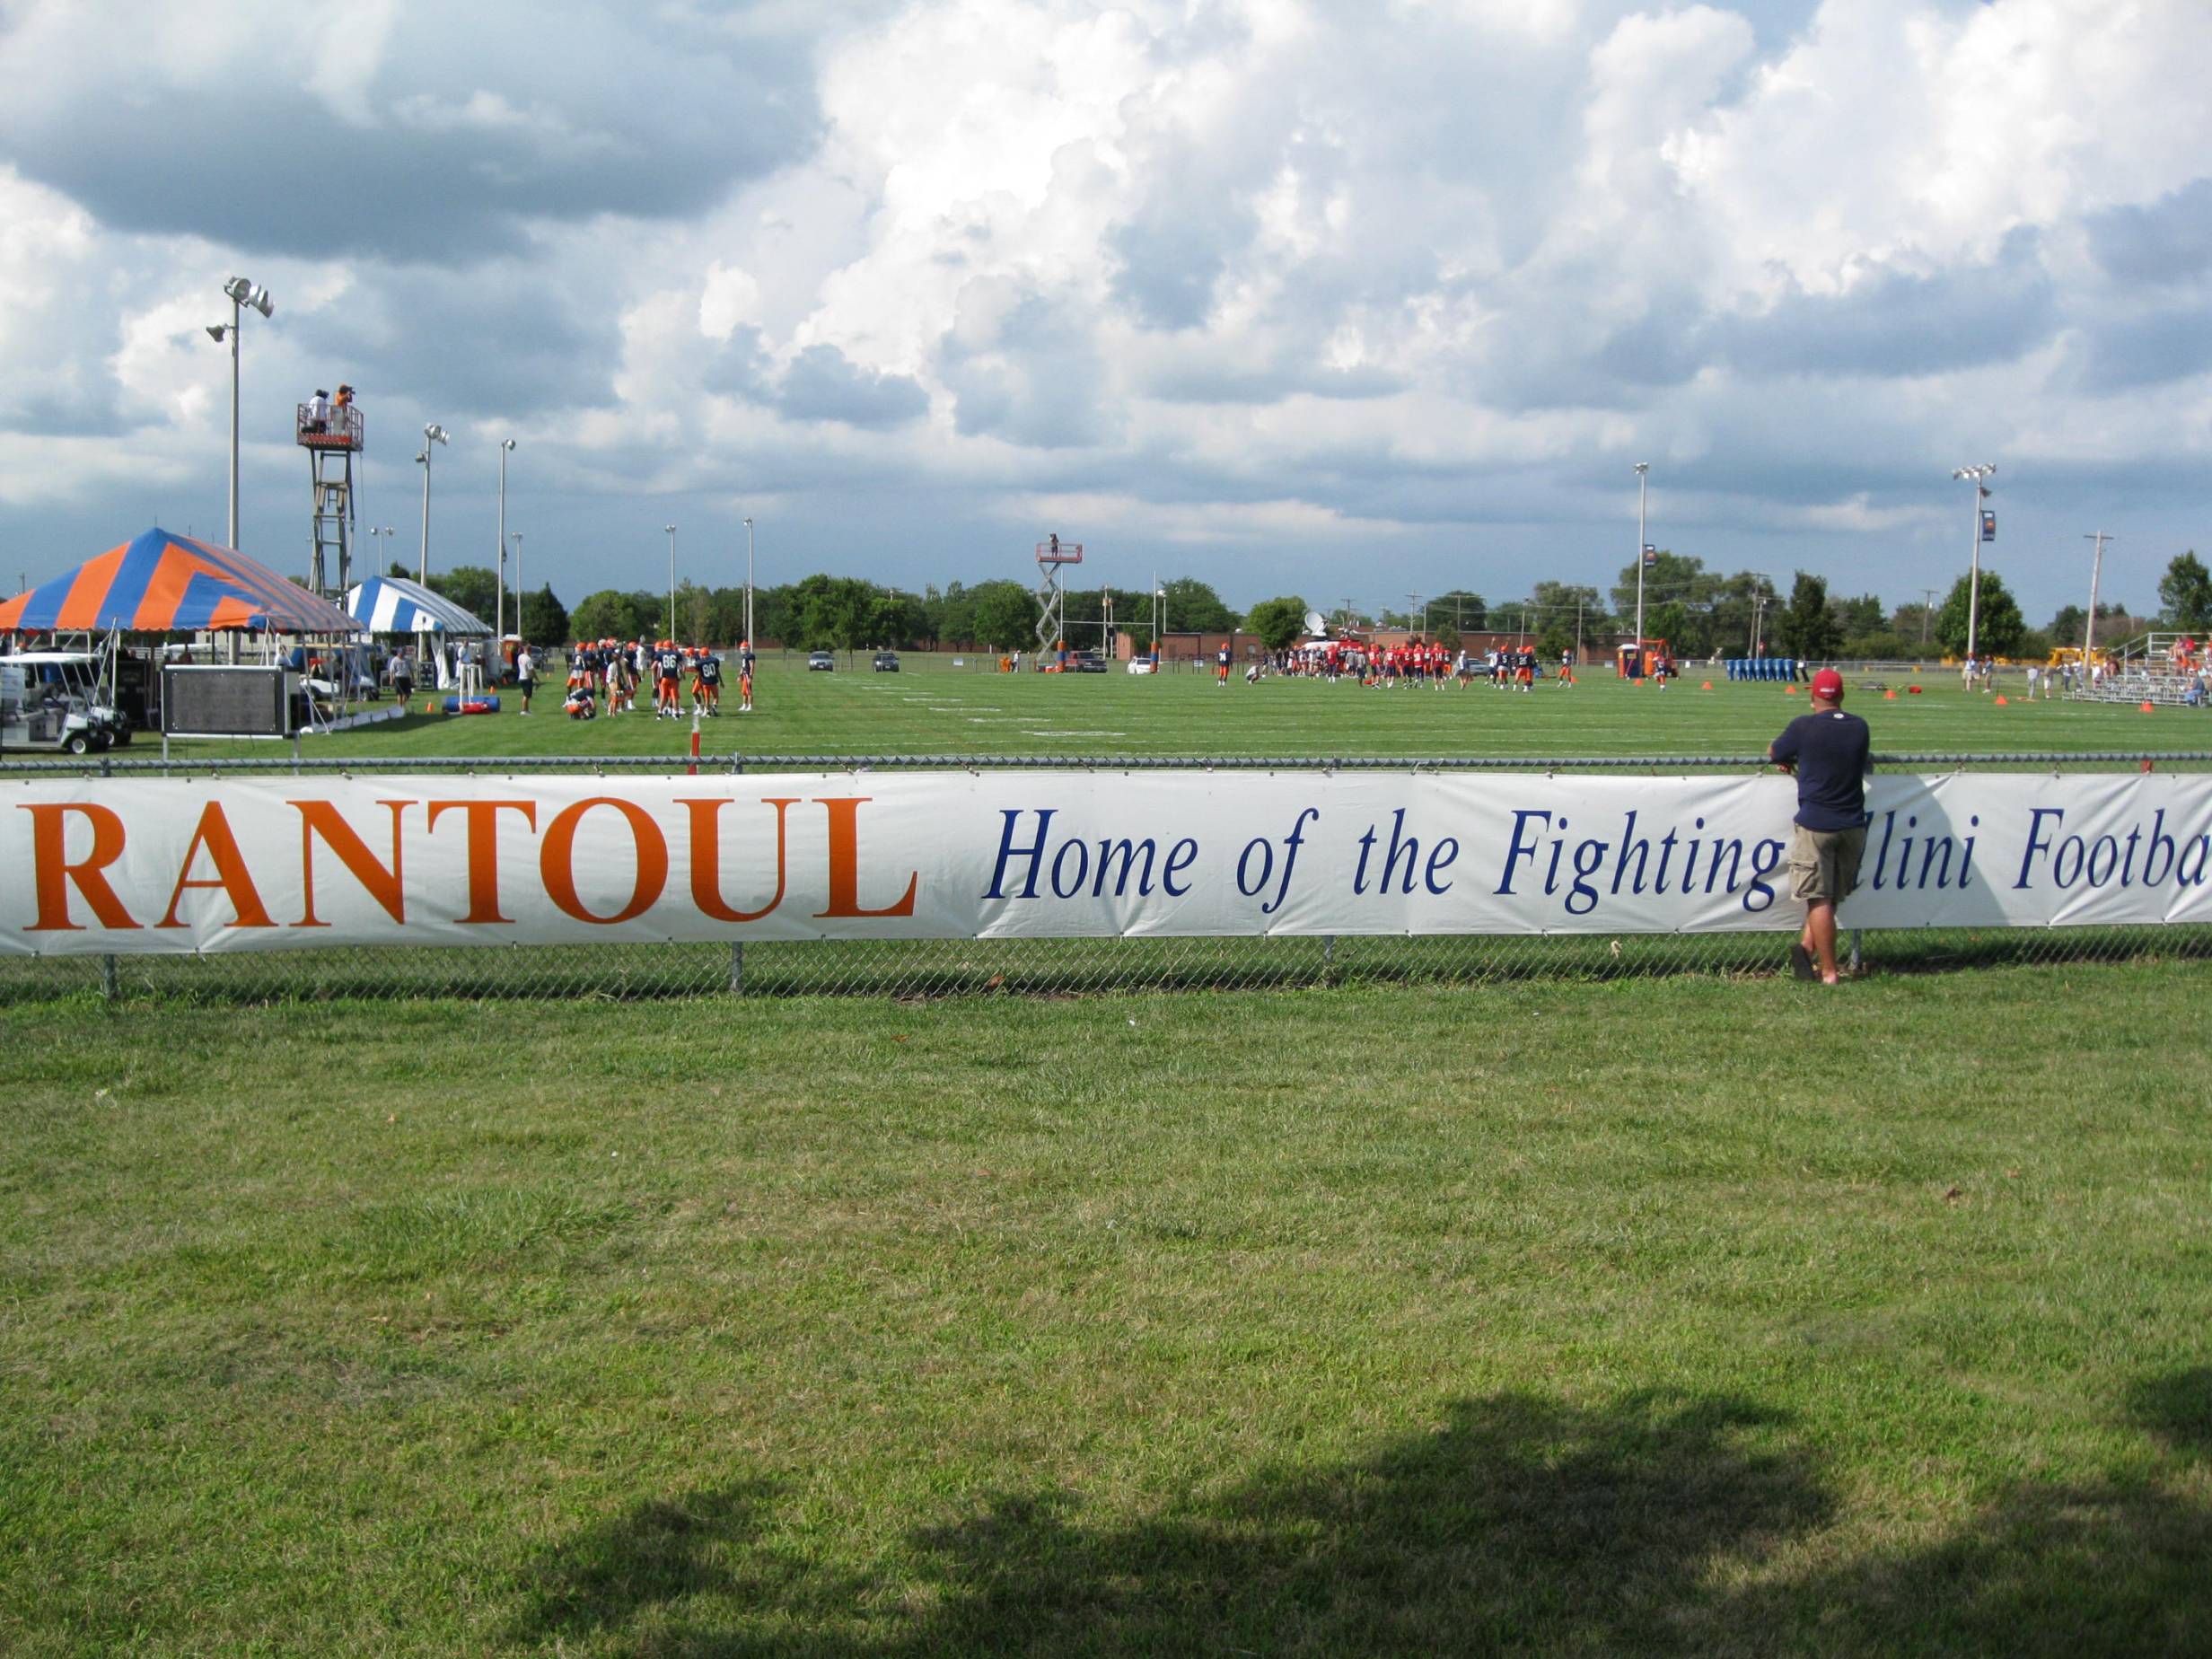 Big news from Camp Rantoul